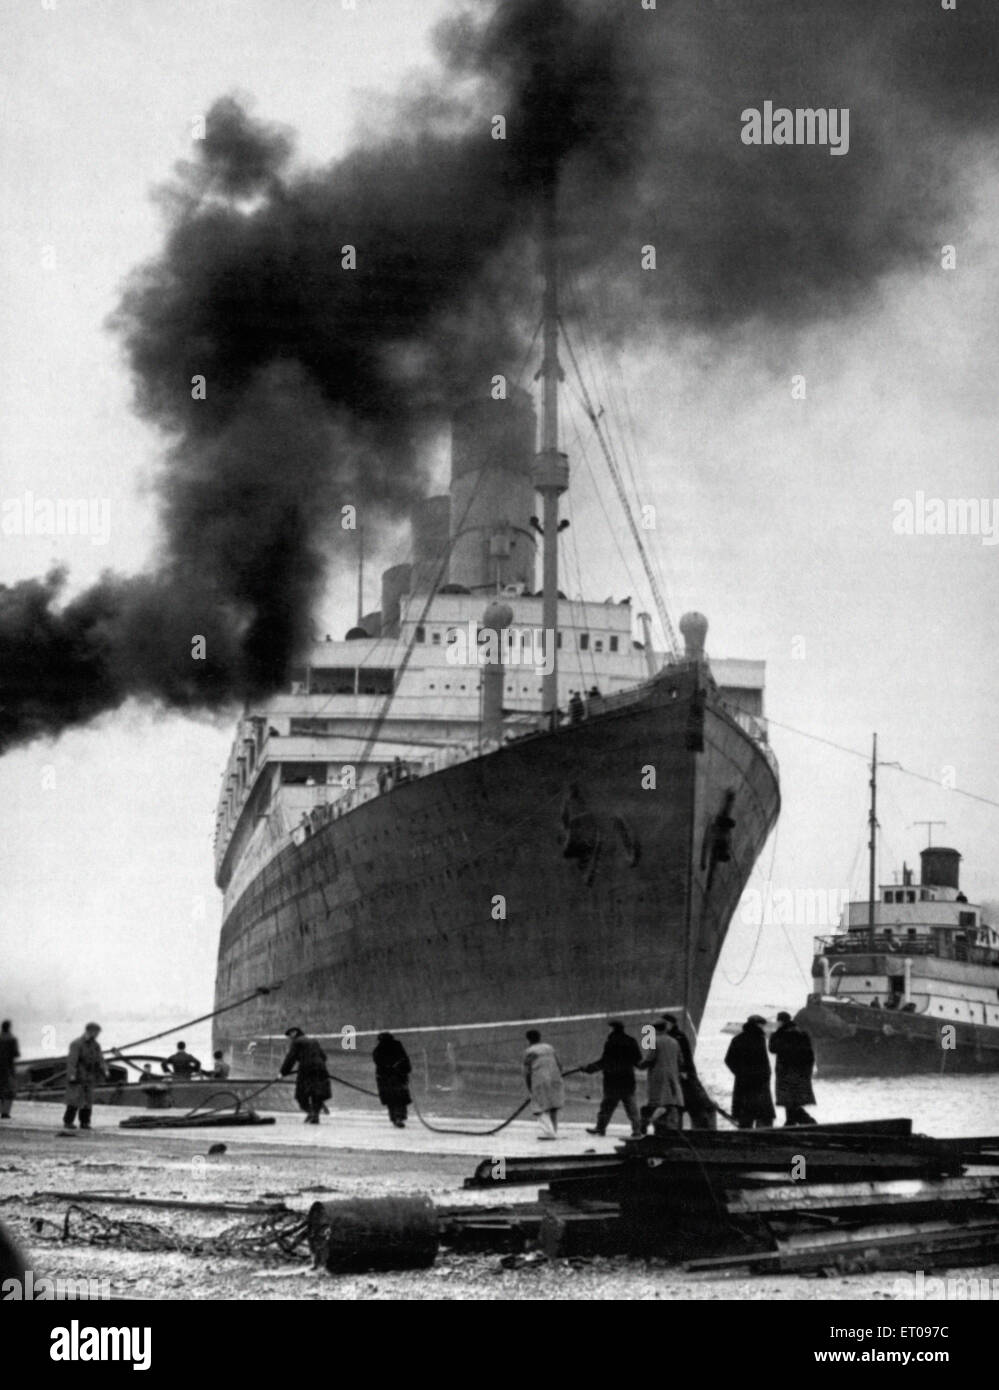 The 45,000 ton liner Aquitania leaves Southampton dock on her final voyage, bound for her birthplace The Clyde to be broken up after 36 years service. 20th February 1950. Stock Photo